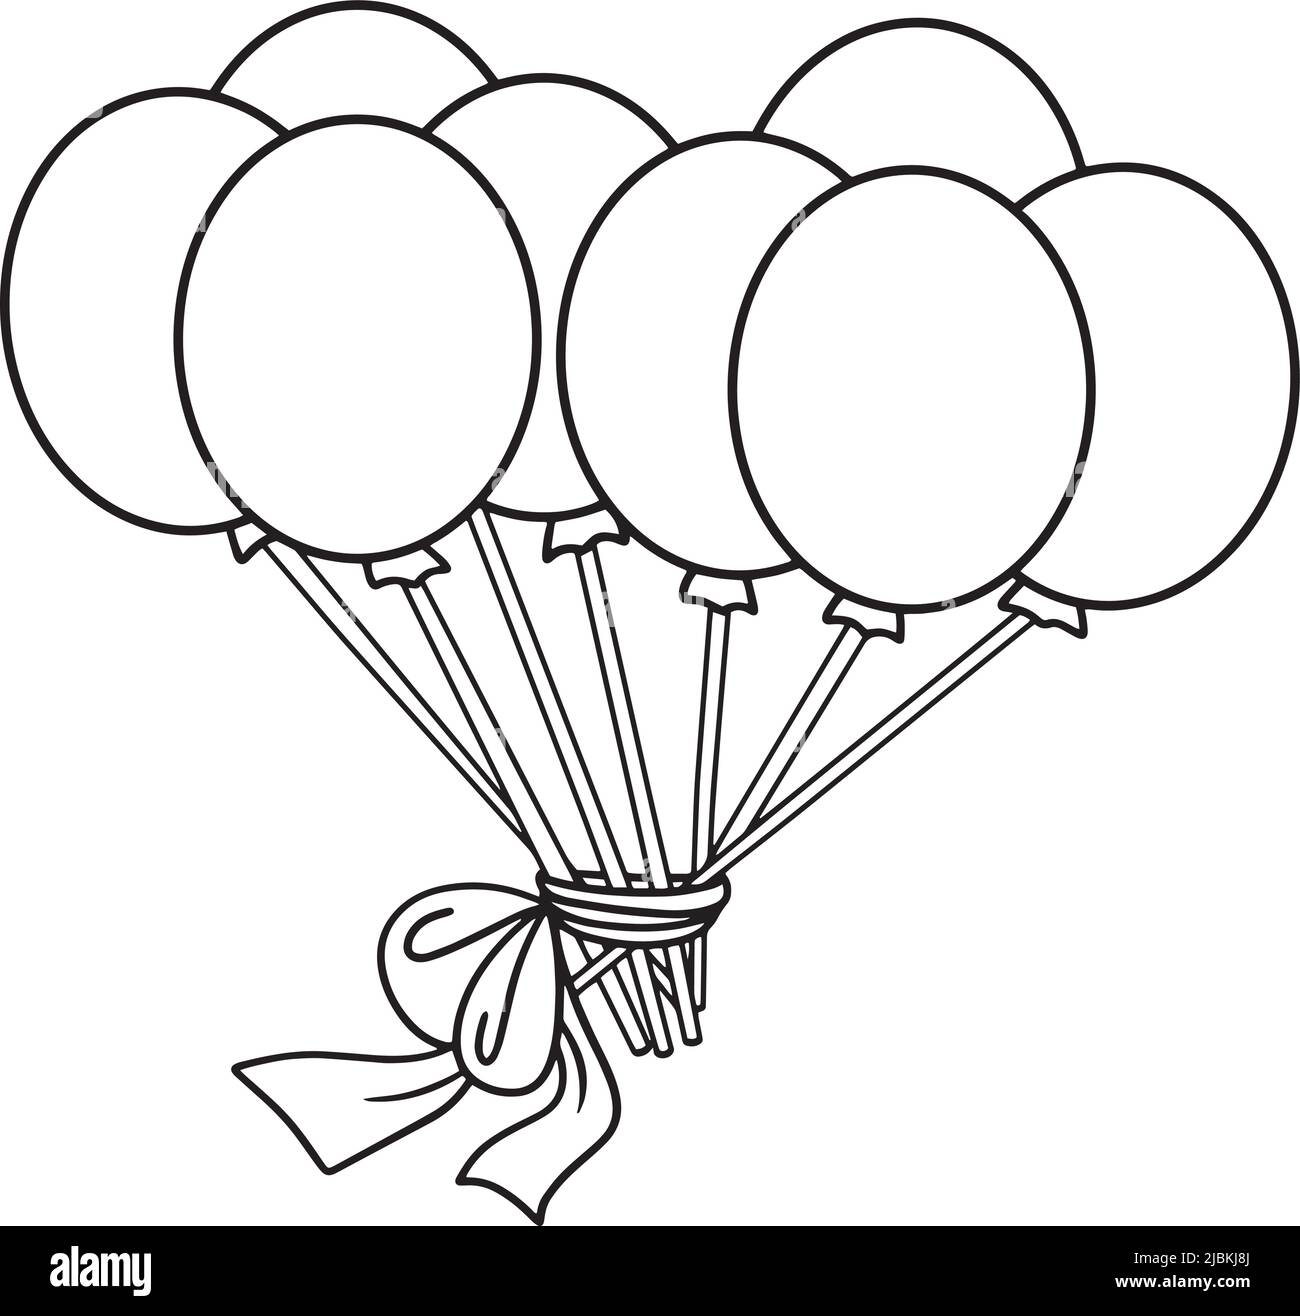 coloring-pages-for-kids-balloons